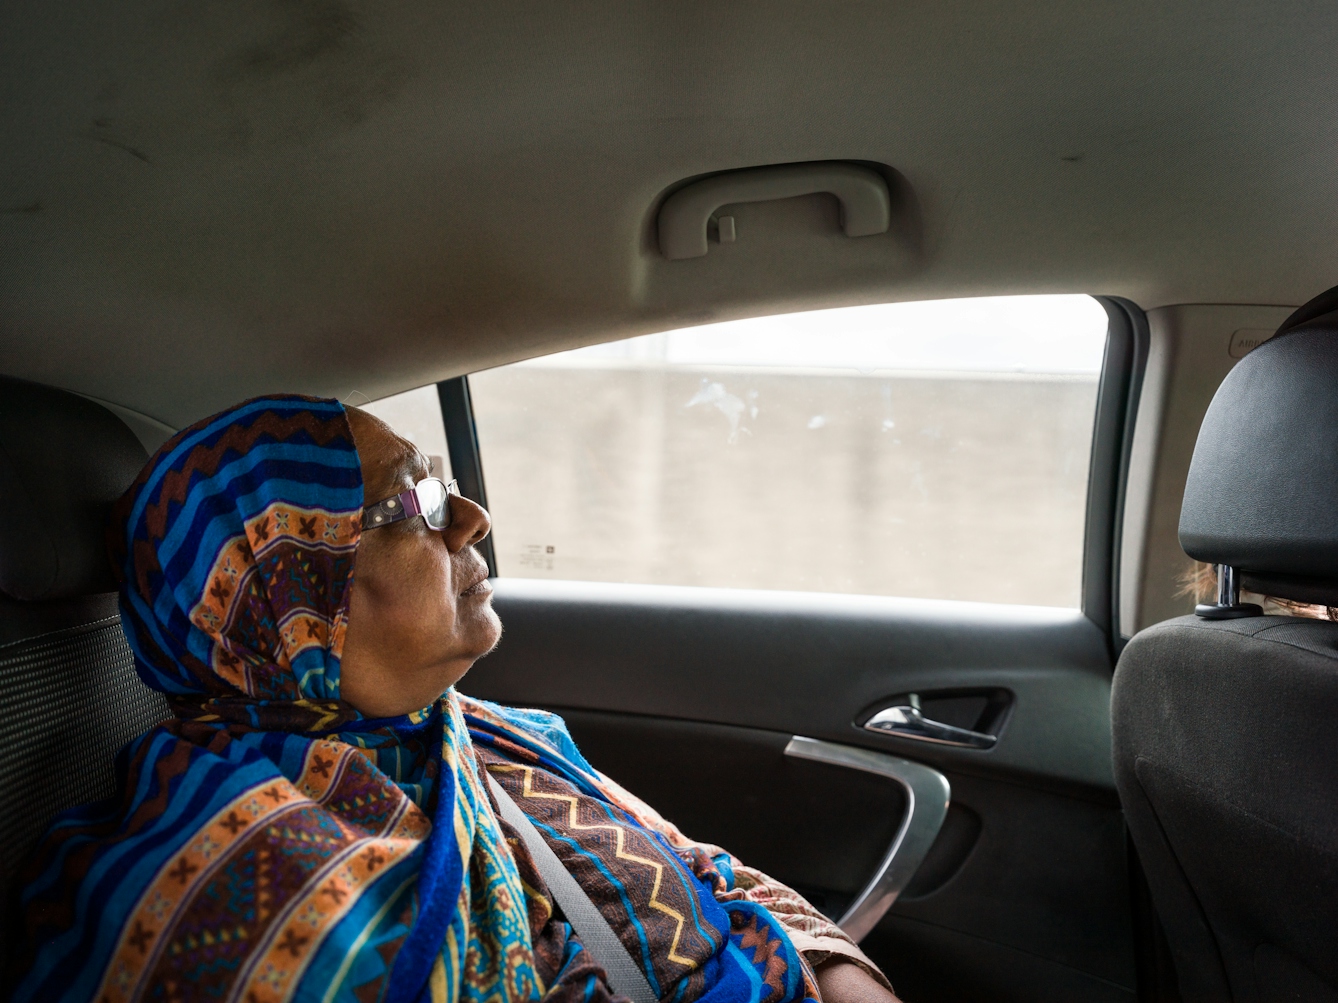 Photograph of Sarifa Patel relaxing in the back of a taxi.